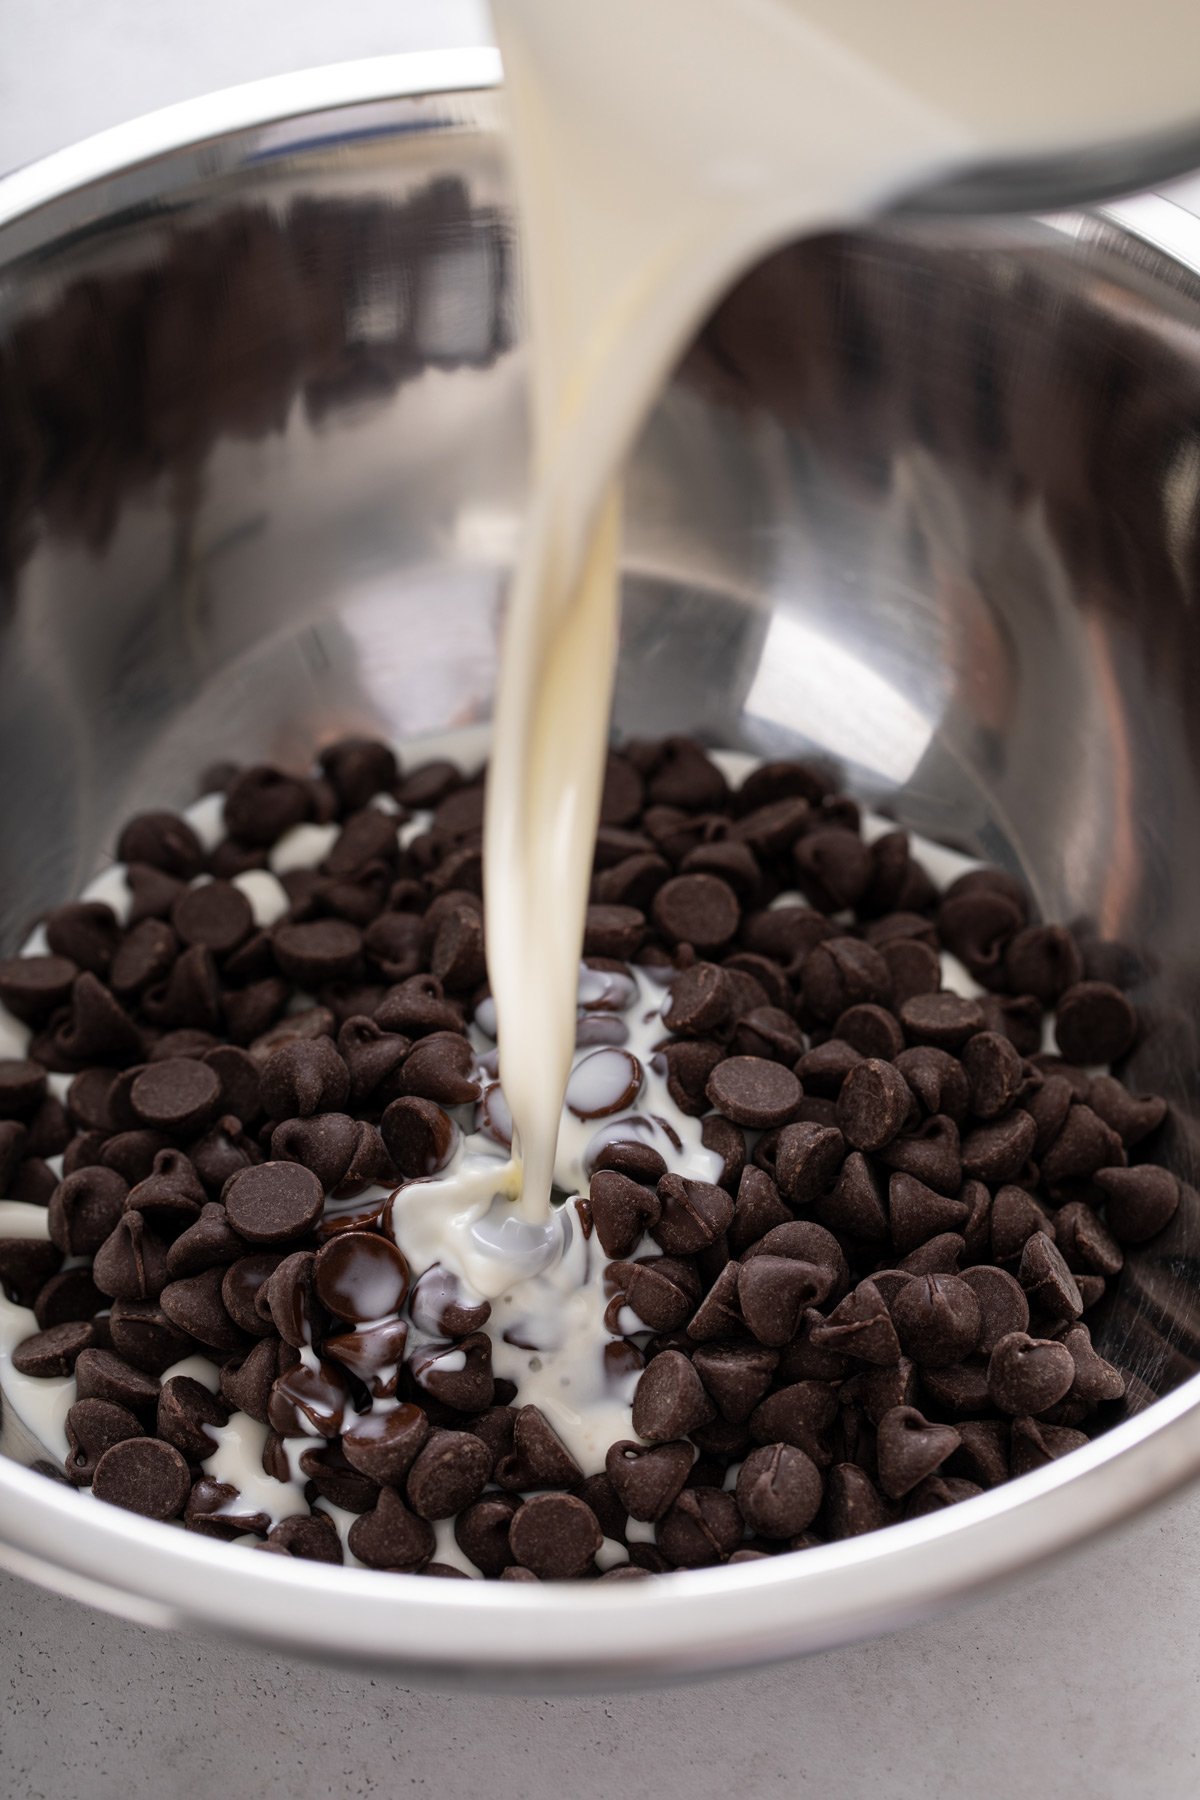 Hot cream being poured over chocolate chips in a metal bowl.